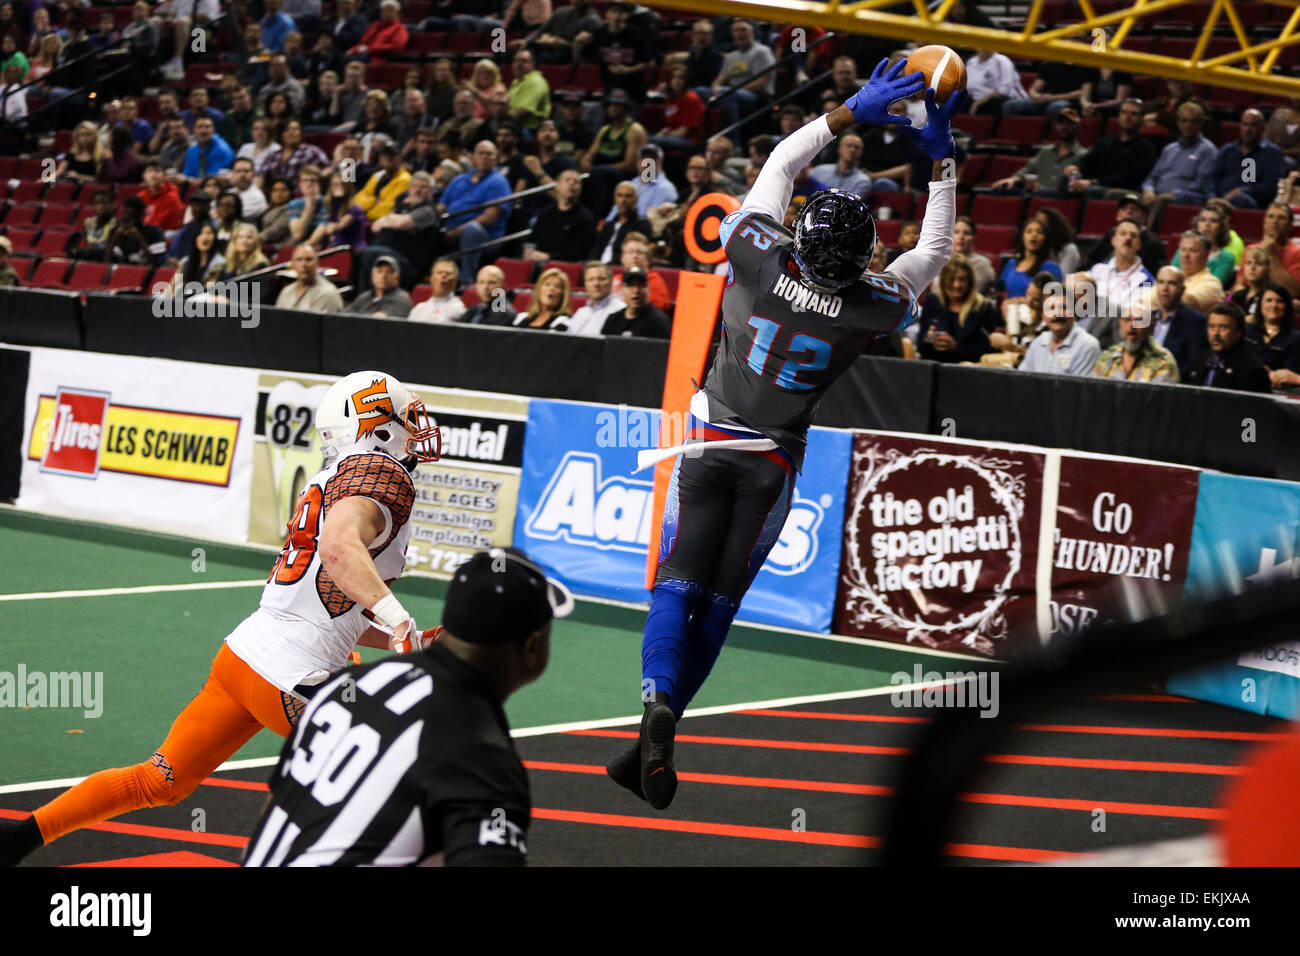 WR JAMAR HOWARD misses a catch in the endzone. The Portland Thunder play the Spokane Shock at the Moda Center on April 9, 2015. 9th Apr, 2015. © David Blair/ZUMA Wire/Alamy Live News Stock Photo